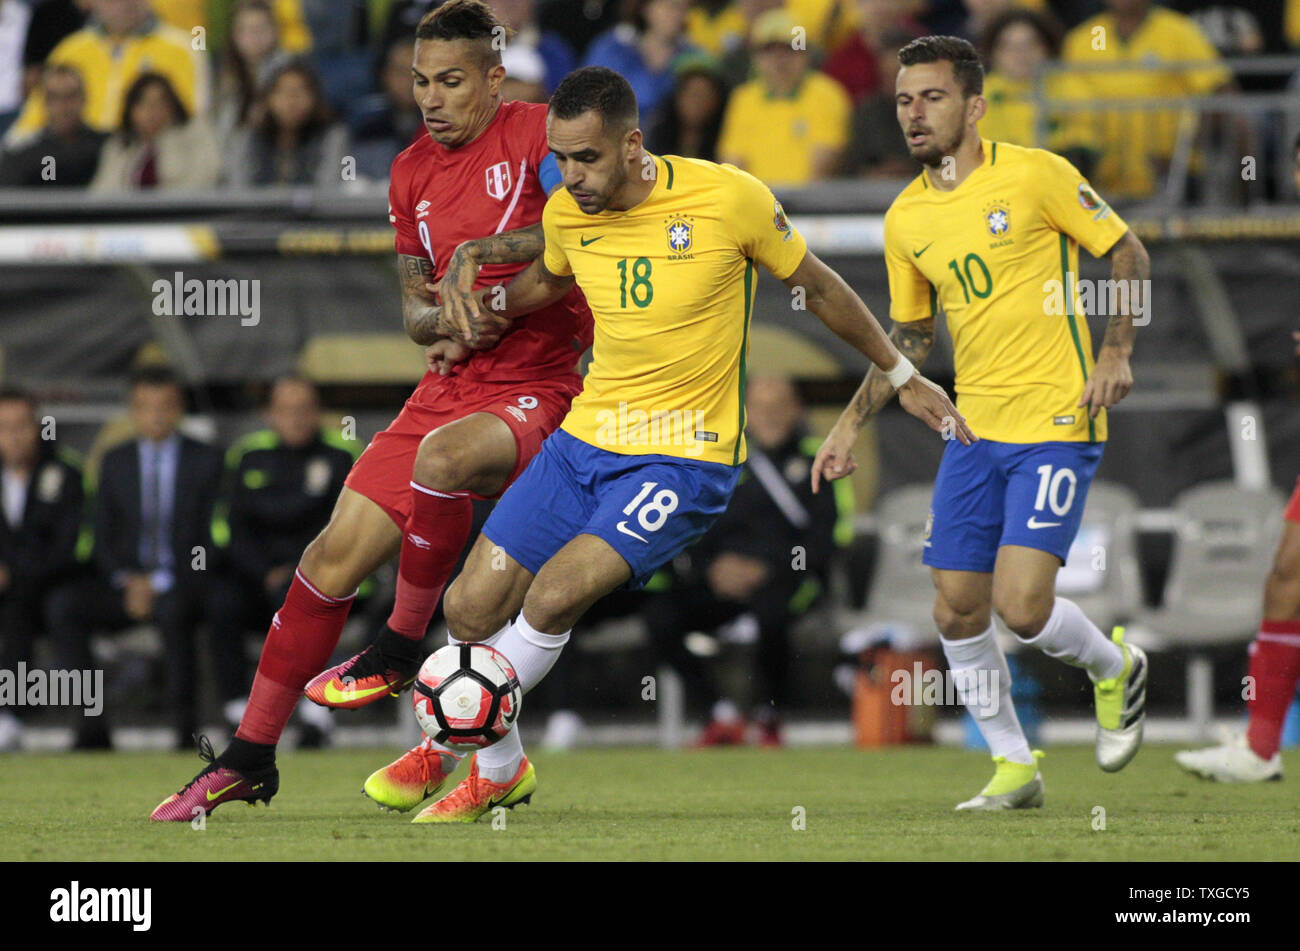 Peru forward Jose Guerrero (9) and Brazil midfielder Renato Augusto (18) tangle with each other while going for the ball during the first half of the 2016 Copa America Centenario Group B match at Gillette Stadium in Foxborough, Massachusetts on June 12, 2016.  Photo by Matthew Healey/UPI Stock Photo